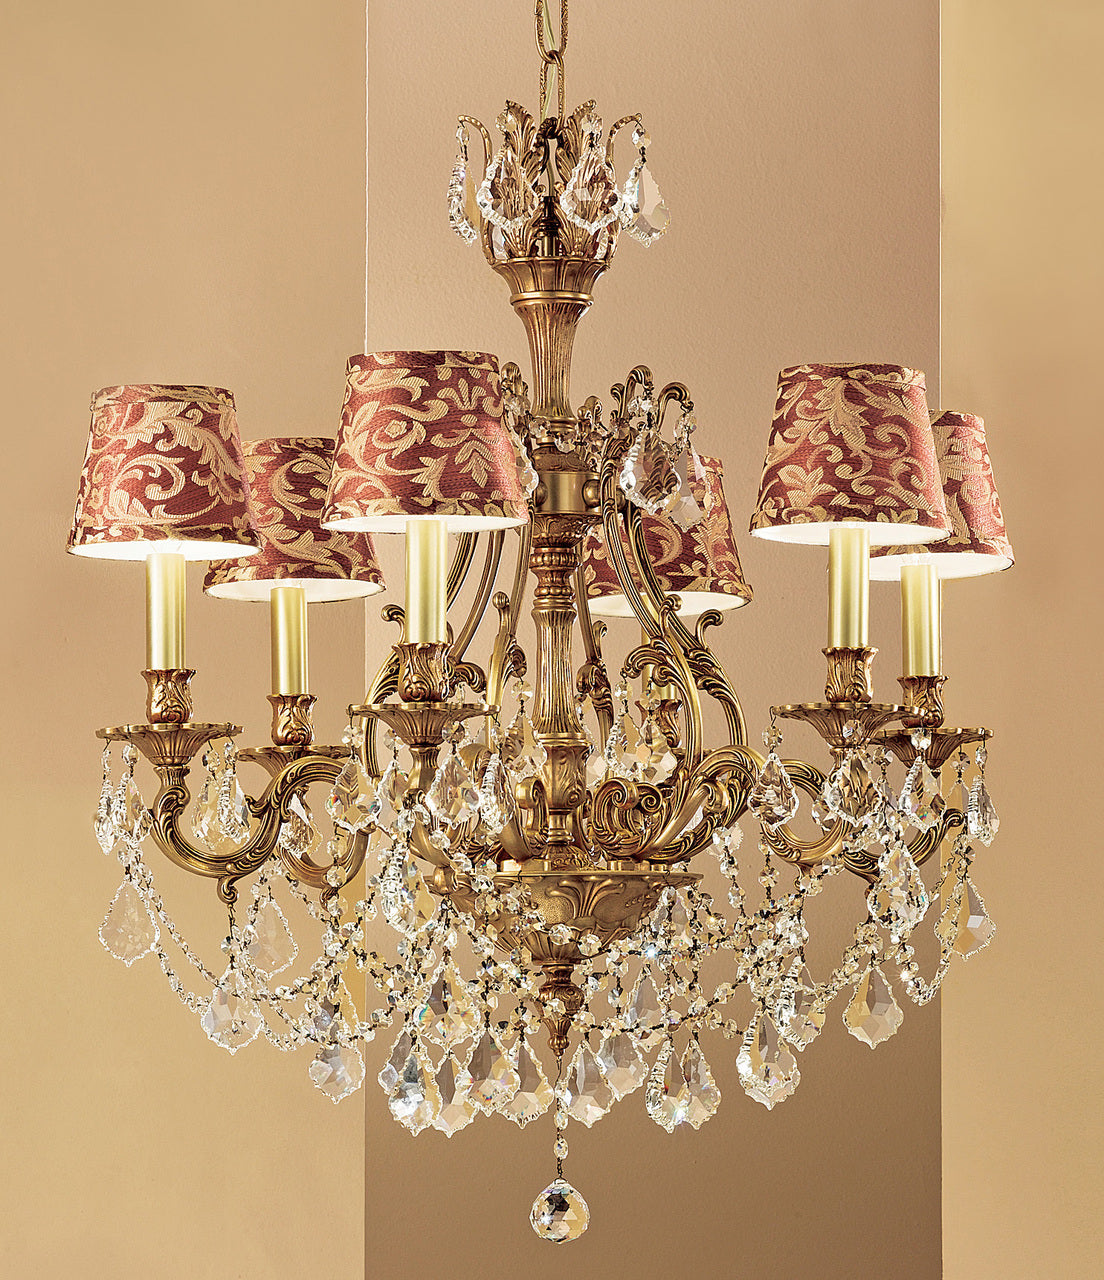 Classic Lighting 57356 FG S Majestic Imperial Crystal Chandelier in French Gold (Imported from Spain)